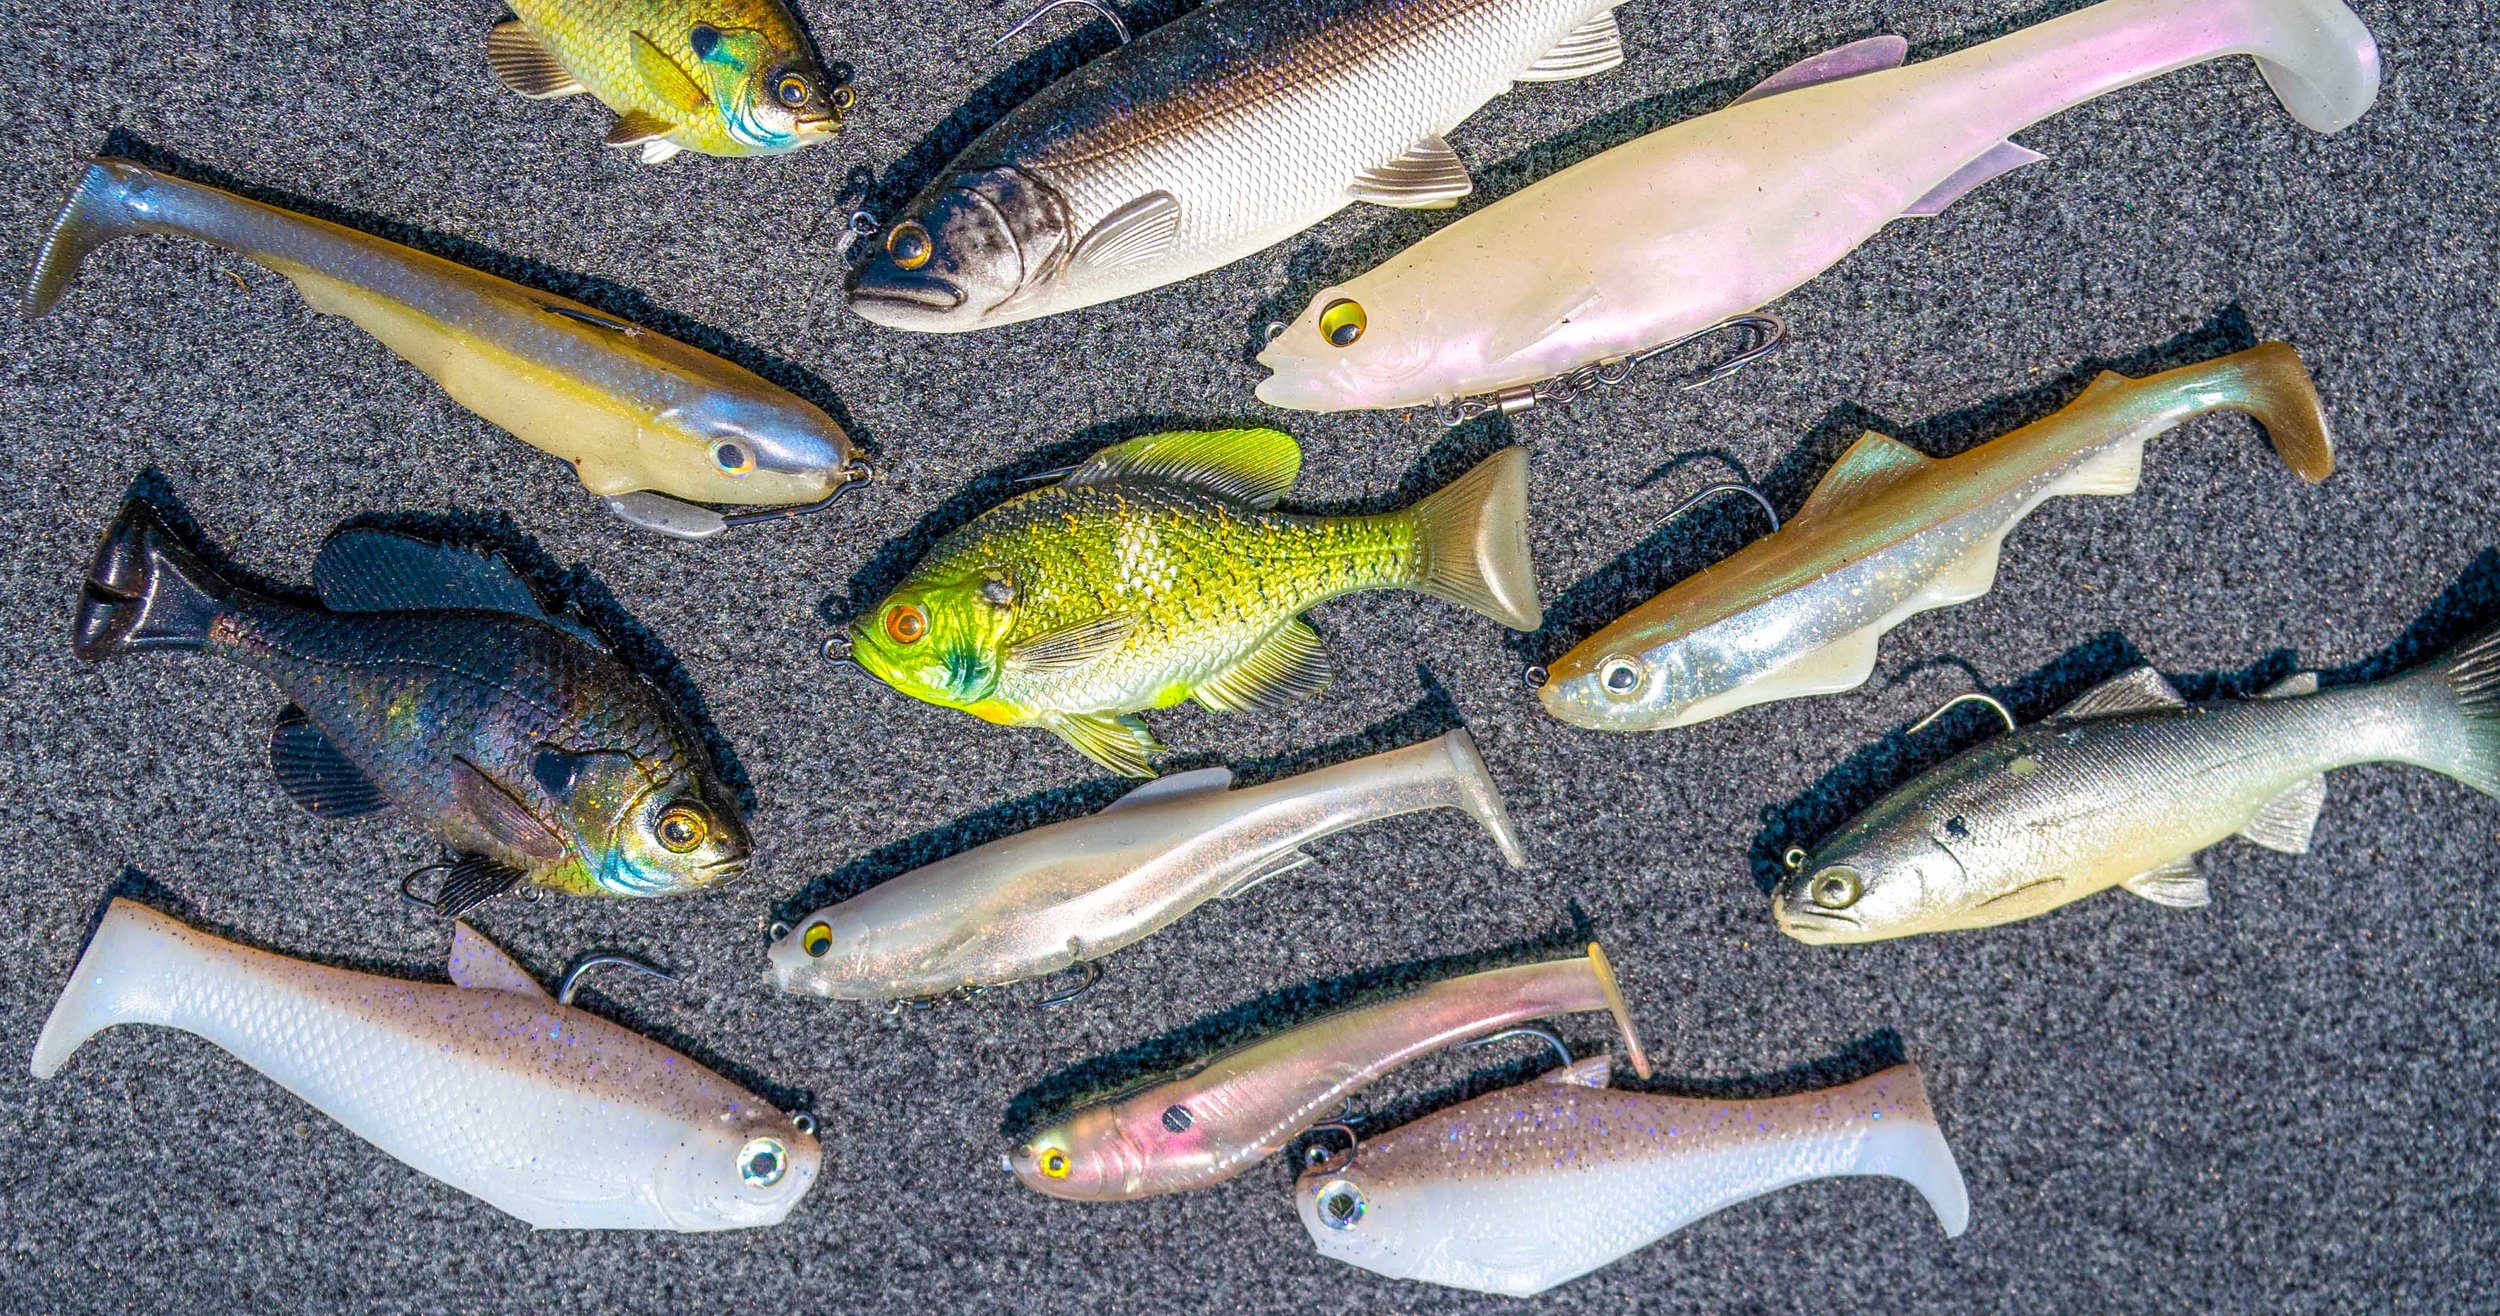 Swimbait Tips For Early Spring Bass Fishing! — Tactical Bassin